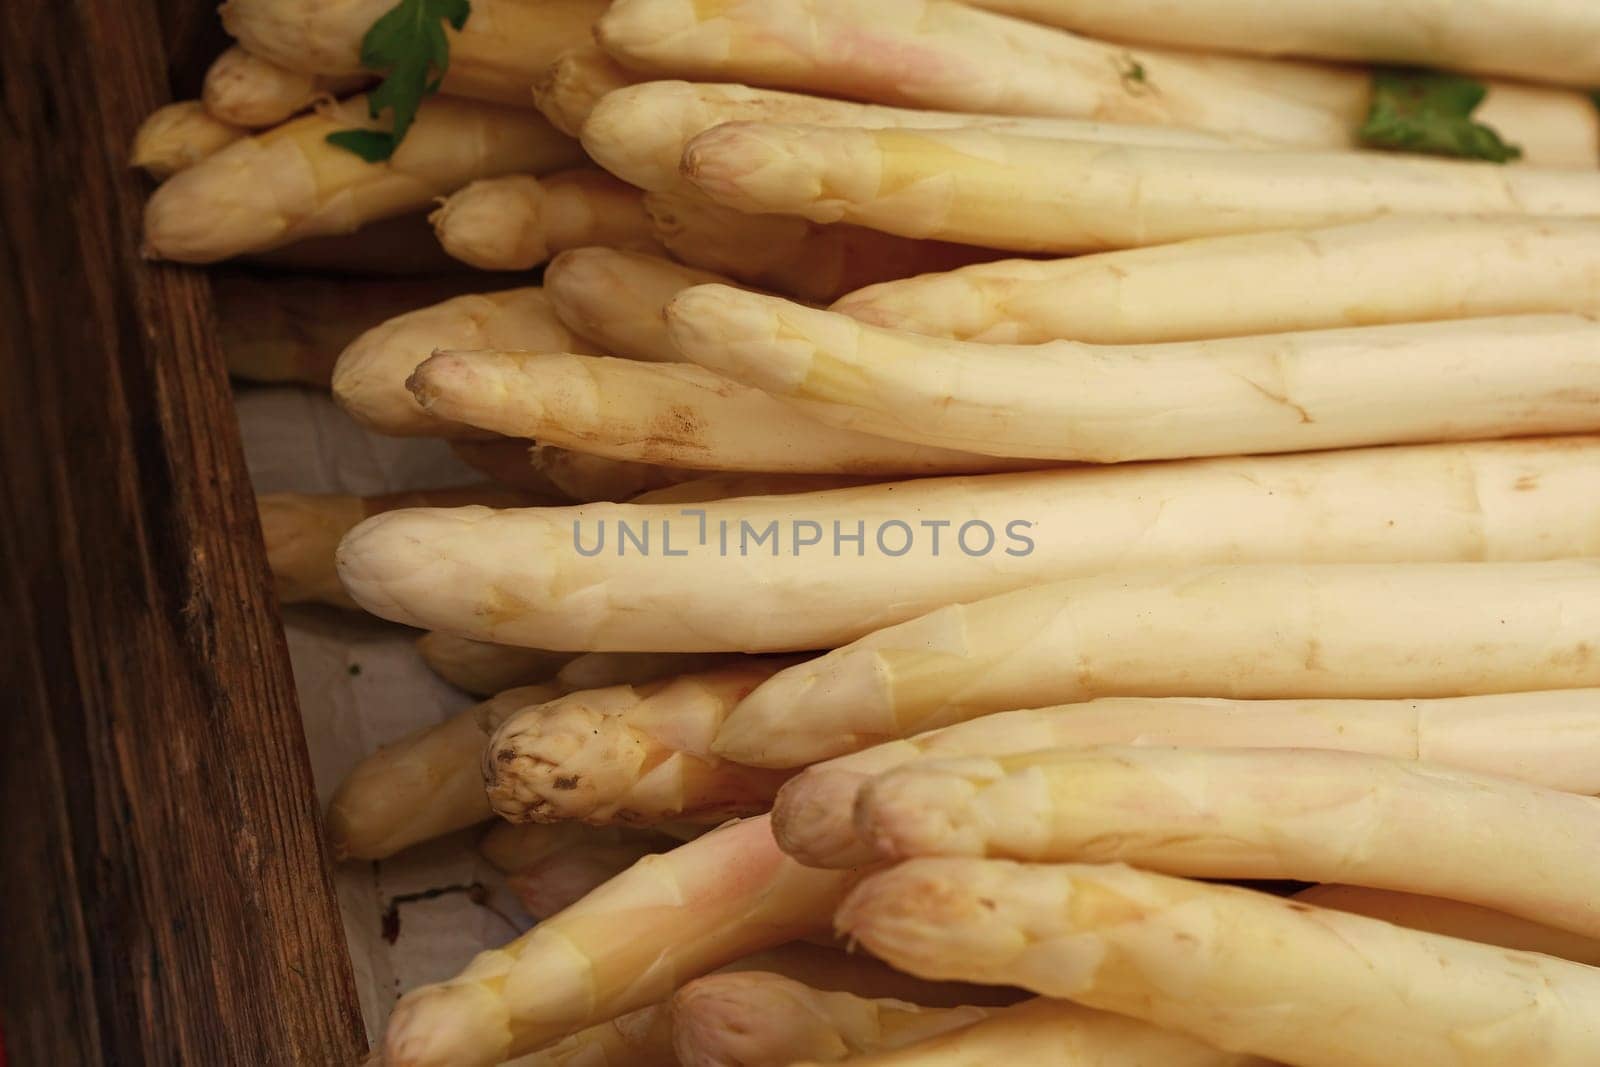 White asparagus in wooden box by BreakingTheWalls